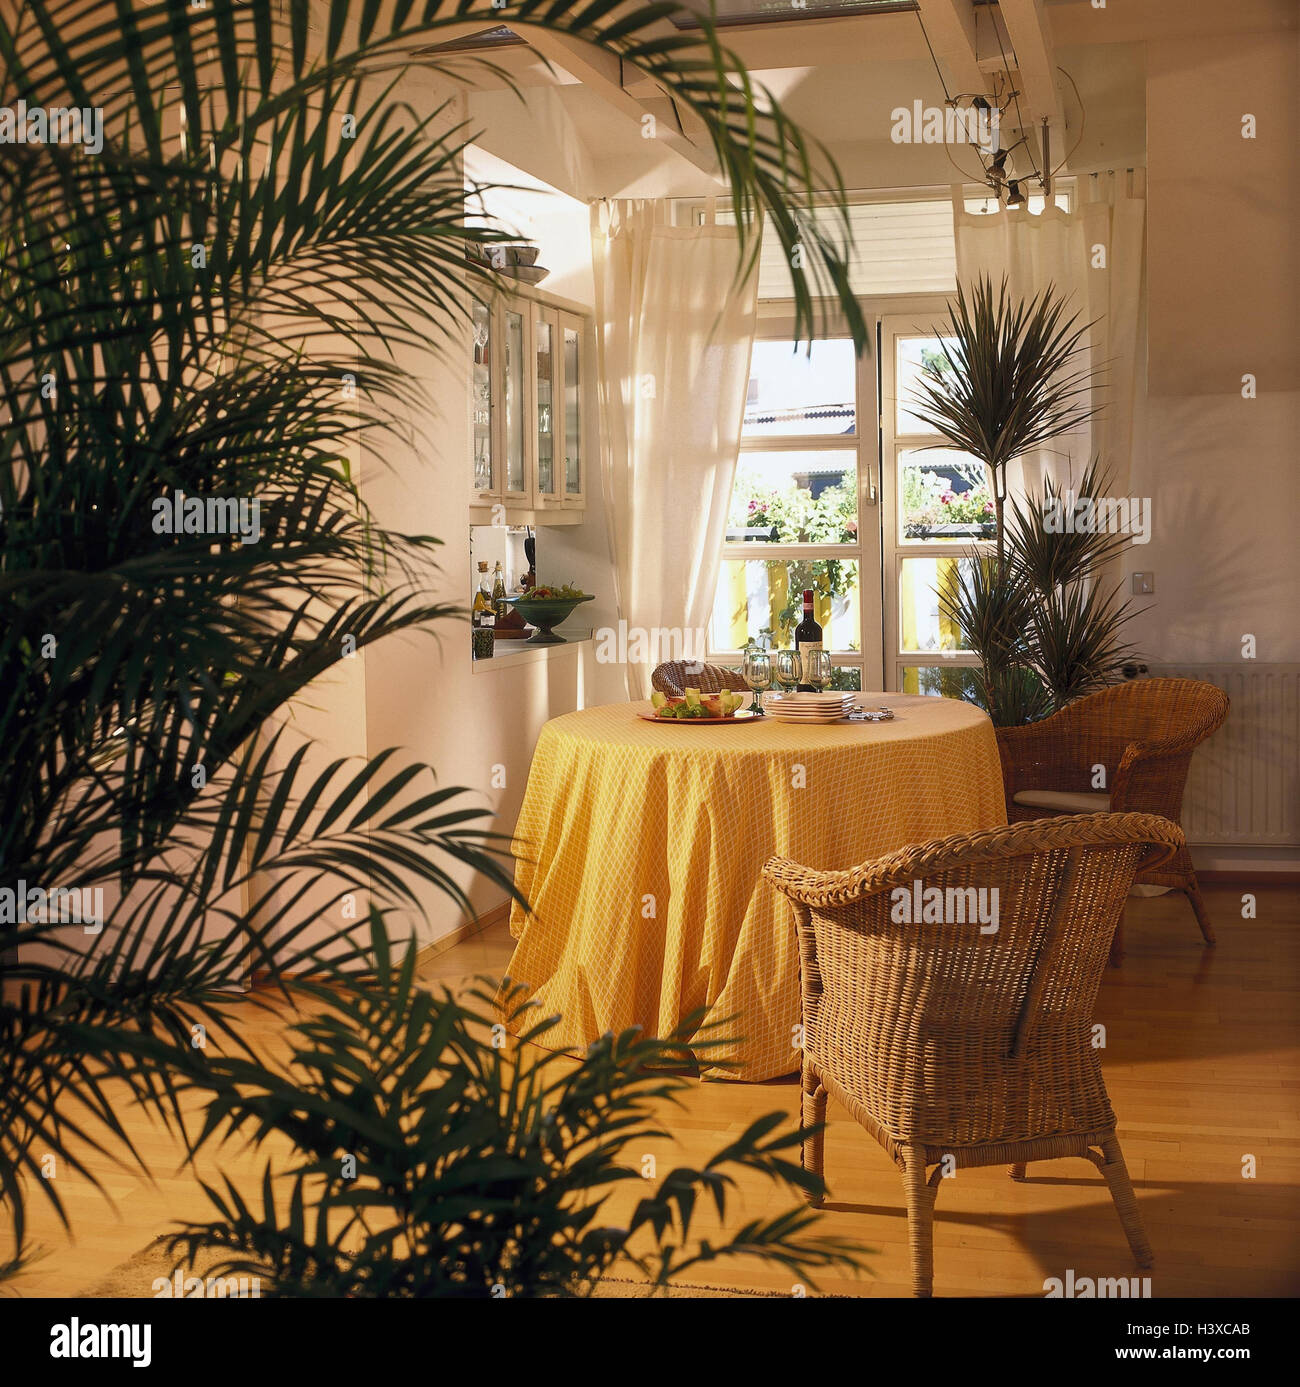 Loft, living space, dining room, flat, inside, interior shot, dining table, wicker armchair, indoor plants, Arecapalme, sword fern, dragon's tree, product photography Stock Photo